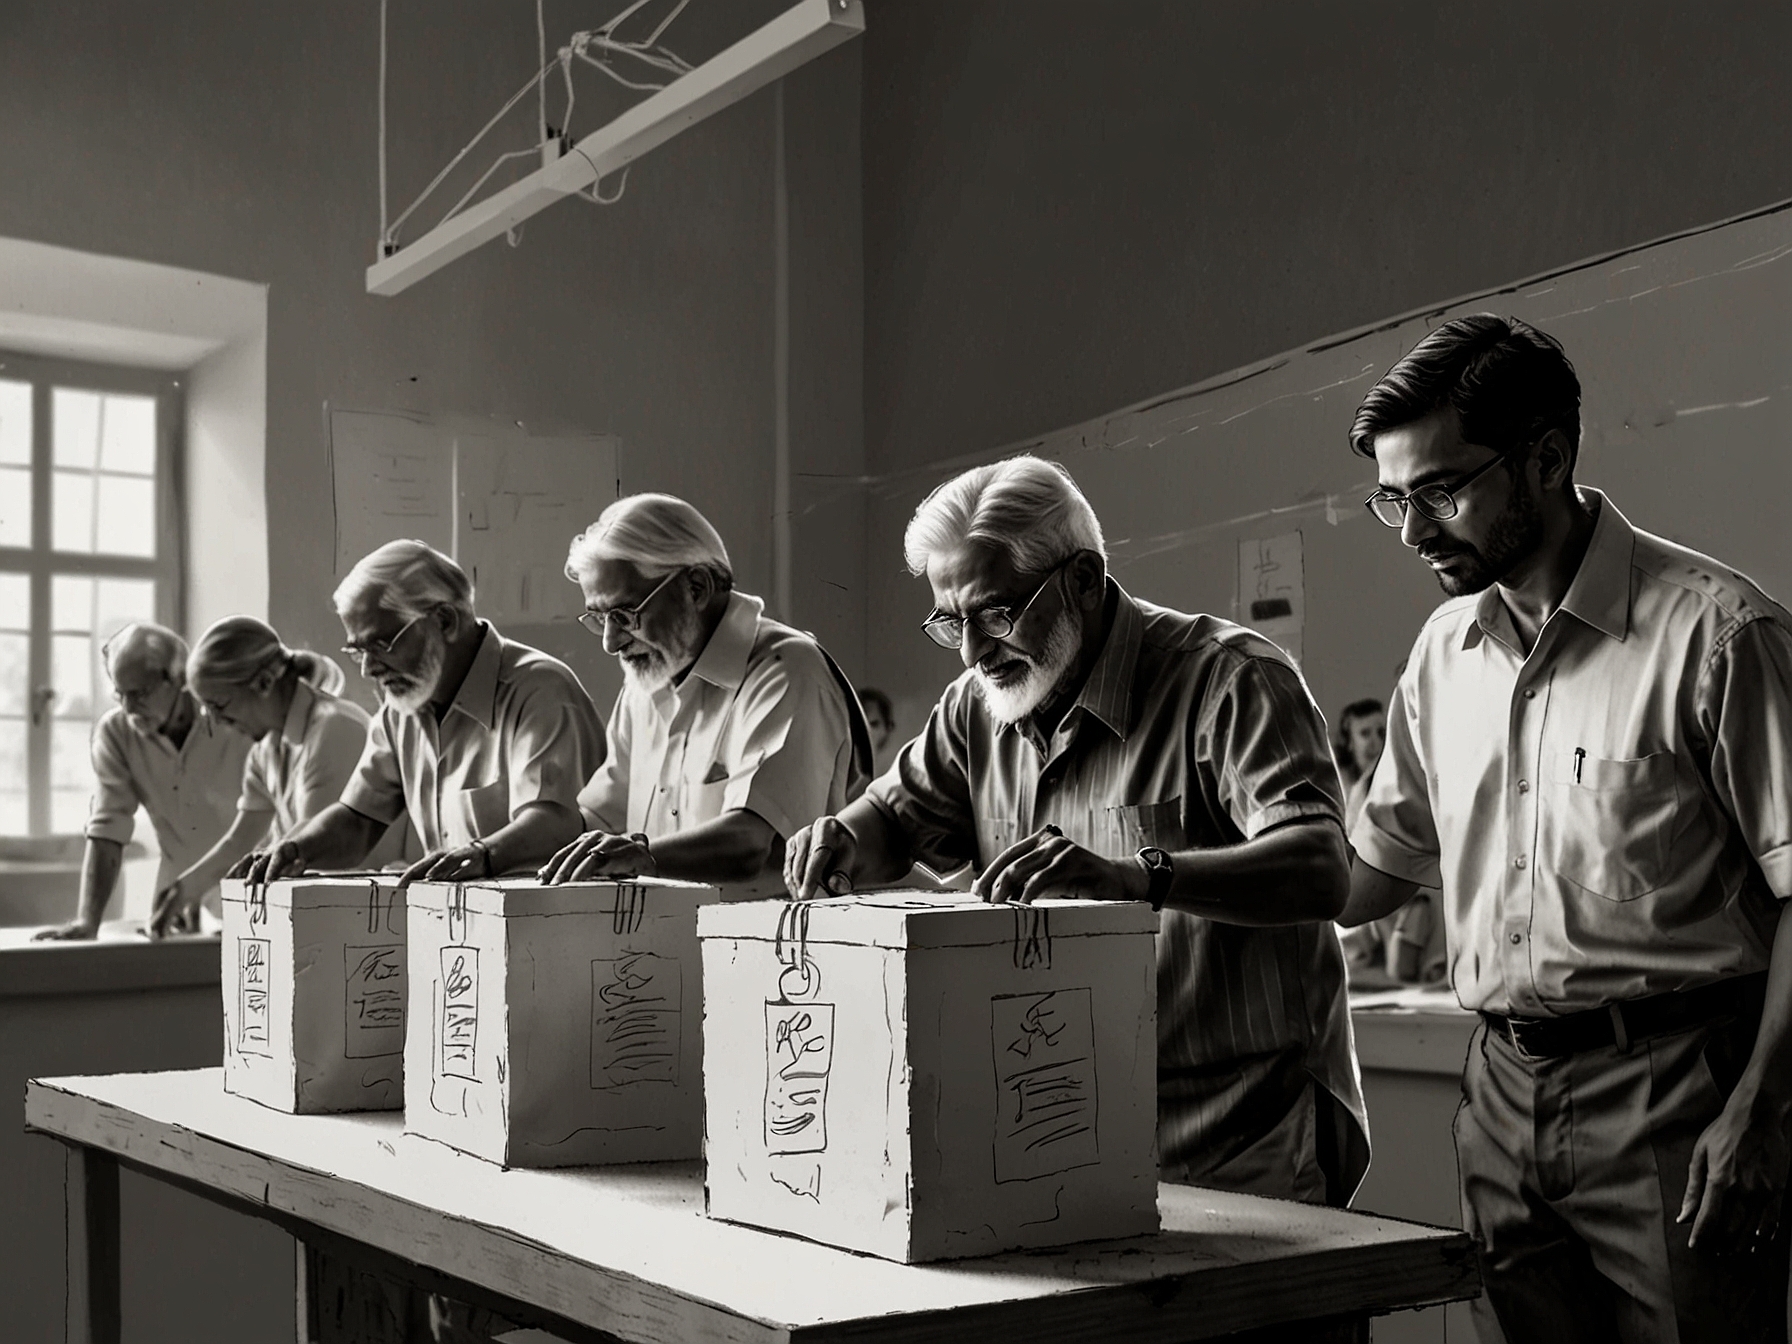 A diverse group of Indian voters casting their ballots at a polling station during the recent elections.